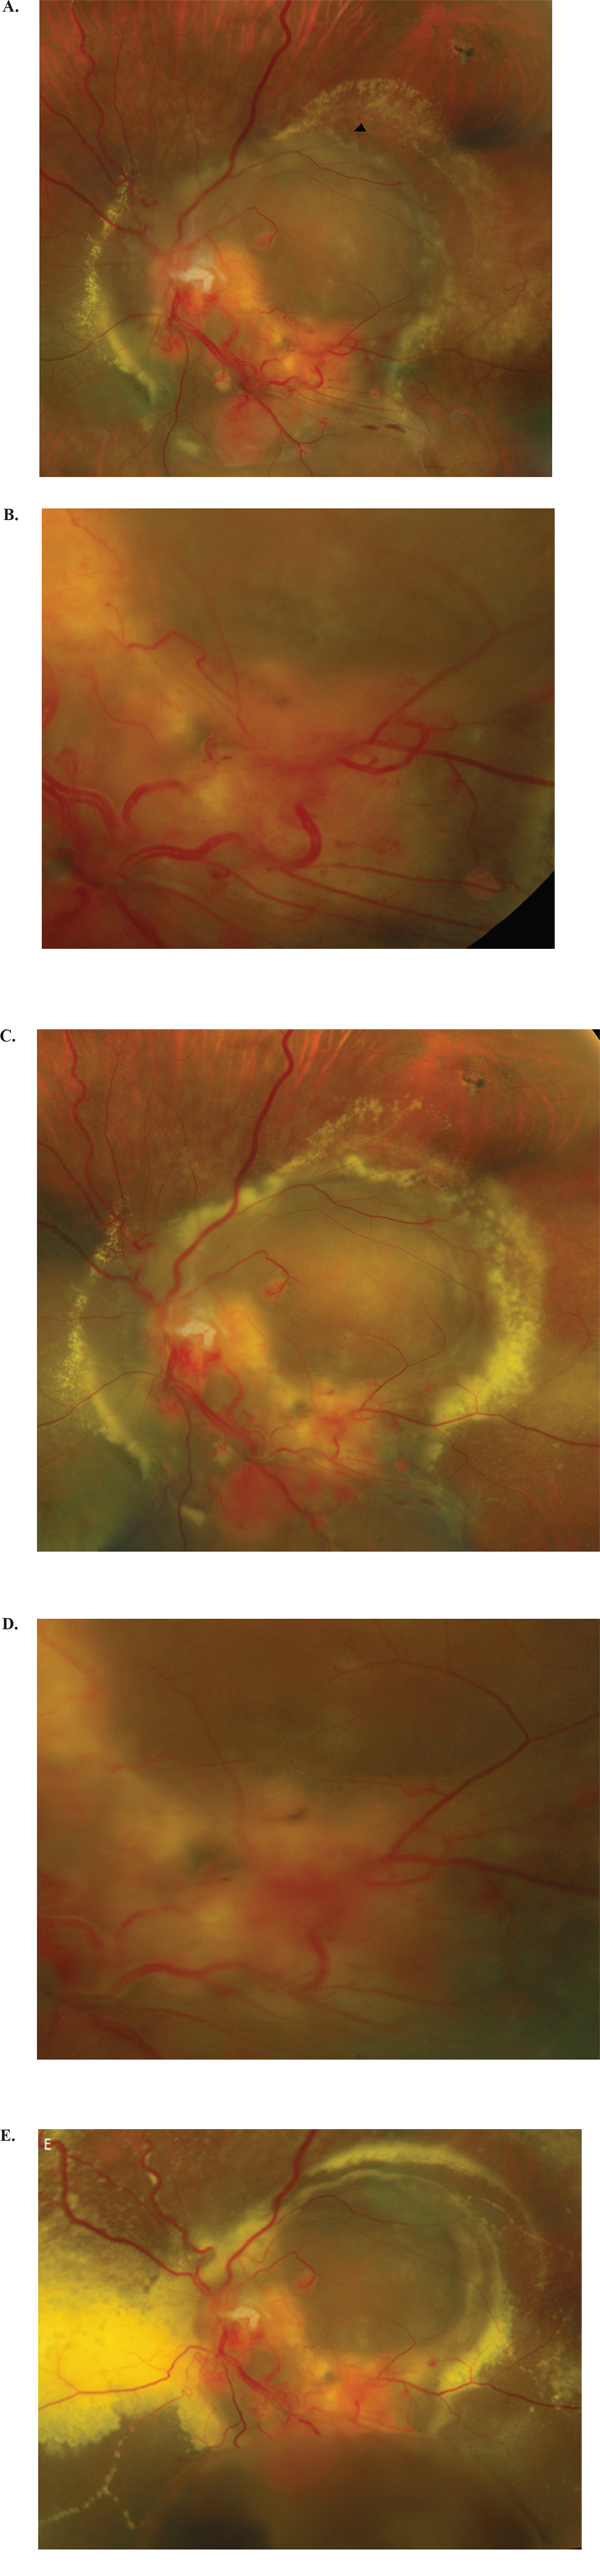 Images of retinal capillary hemangioblastomas (RCH) in the left eye of a 31-year-old patient.